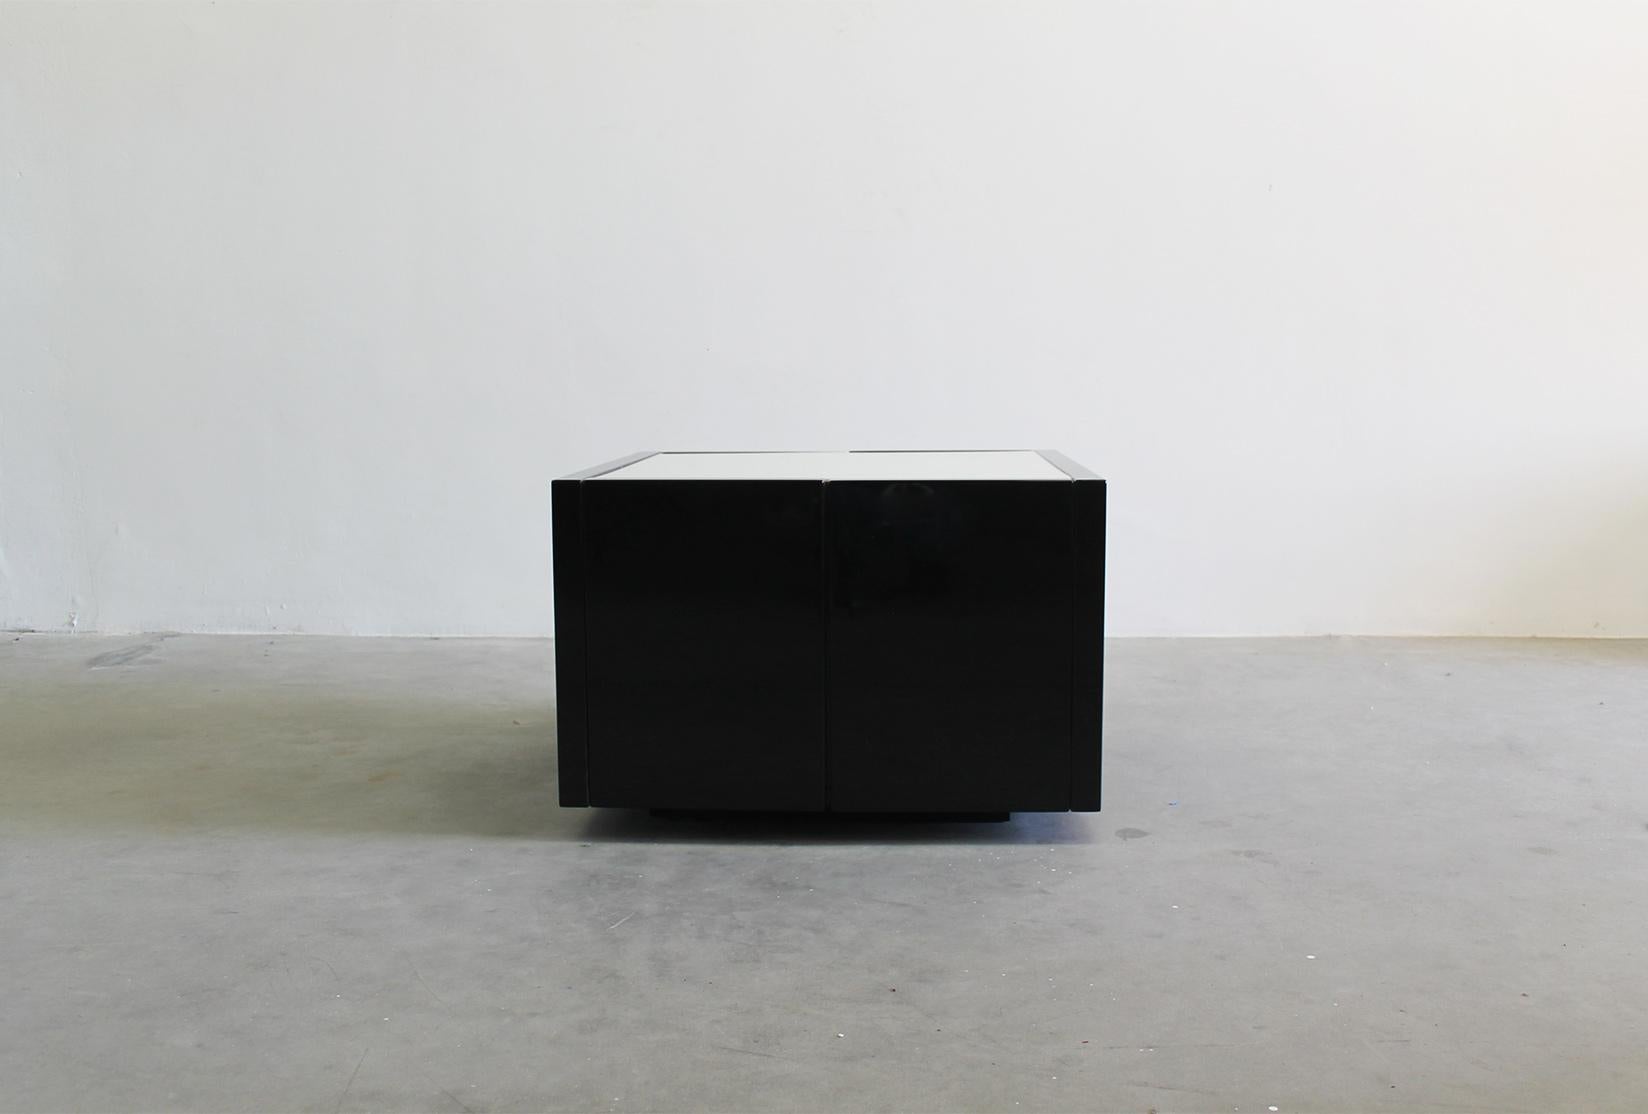 Saratoga luminous side table/cabinet bar in black lacquered wood, this piece presents two openable opposite doors and inner shelves. 

Designed by Massimo and Lella Vignelli and produced by Poltronova in the 1960s 

Massimo Vignelli was a celebrated